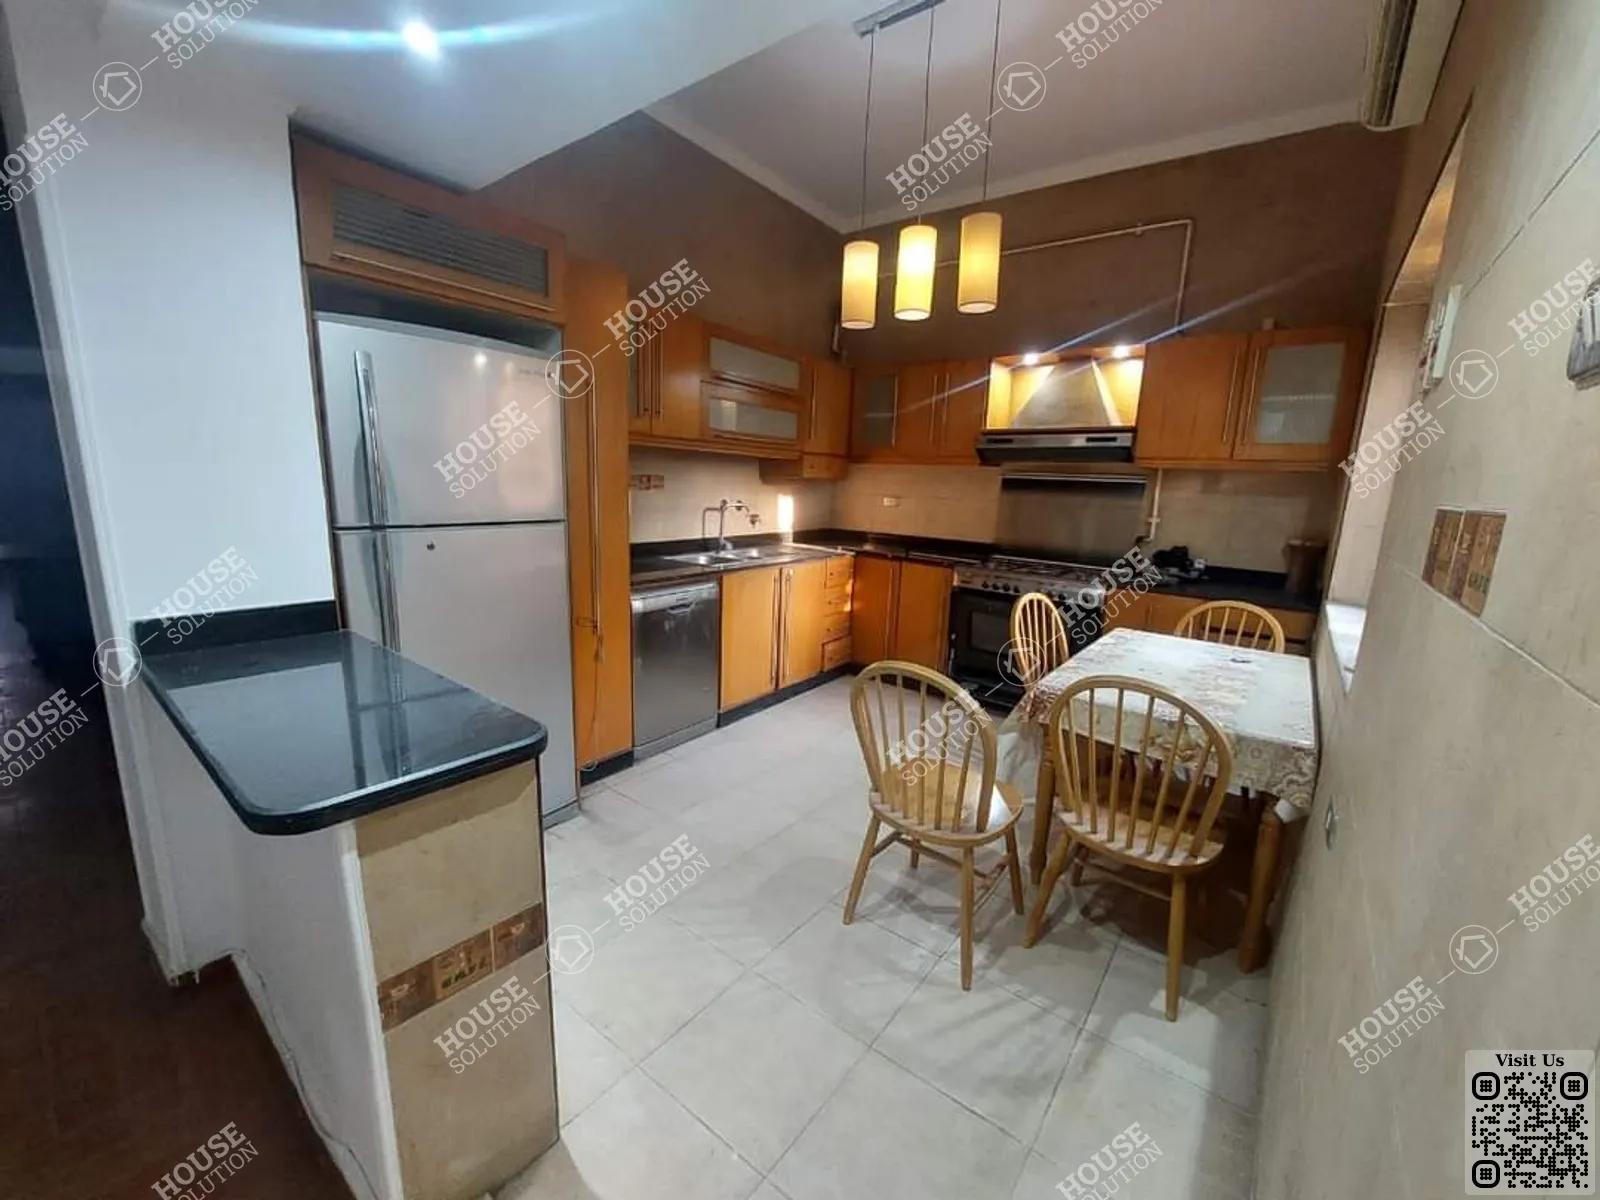 KITCHEN  @ Apartments For Rent In Maadi Maadi Sarayat Area: 240 m² consists of 4 Bedrooms 3 Bathrooms Furnished 5 stars #5859-2